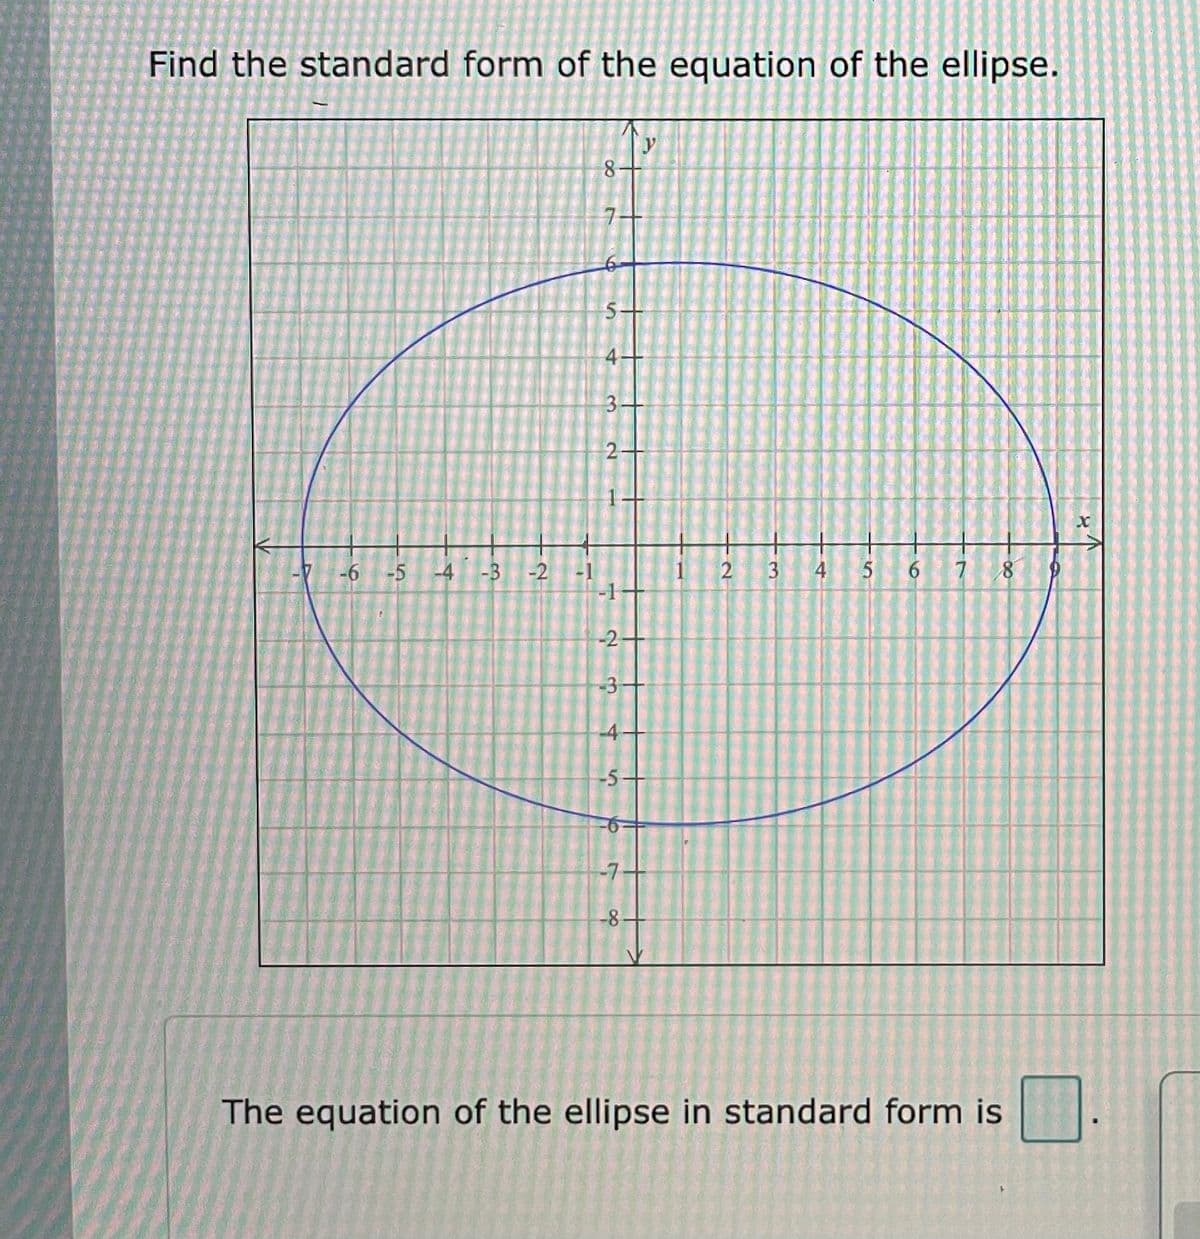 Find the standard form of the equation of the ellipse.
8-
4
3
+++
-4 -3
-2 -1
-1
7 8
-6 -5
4
-2
-3
-4
-5
-7
-8
The equation of the ellipse in standard form is
